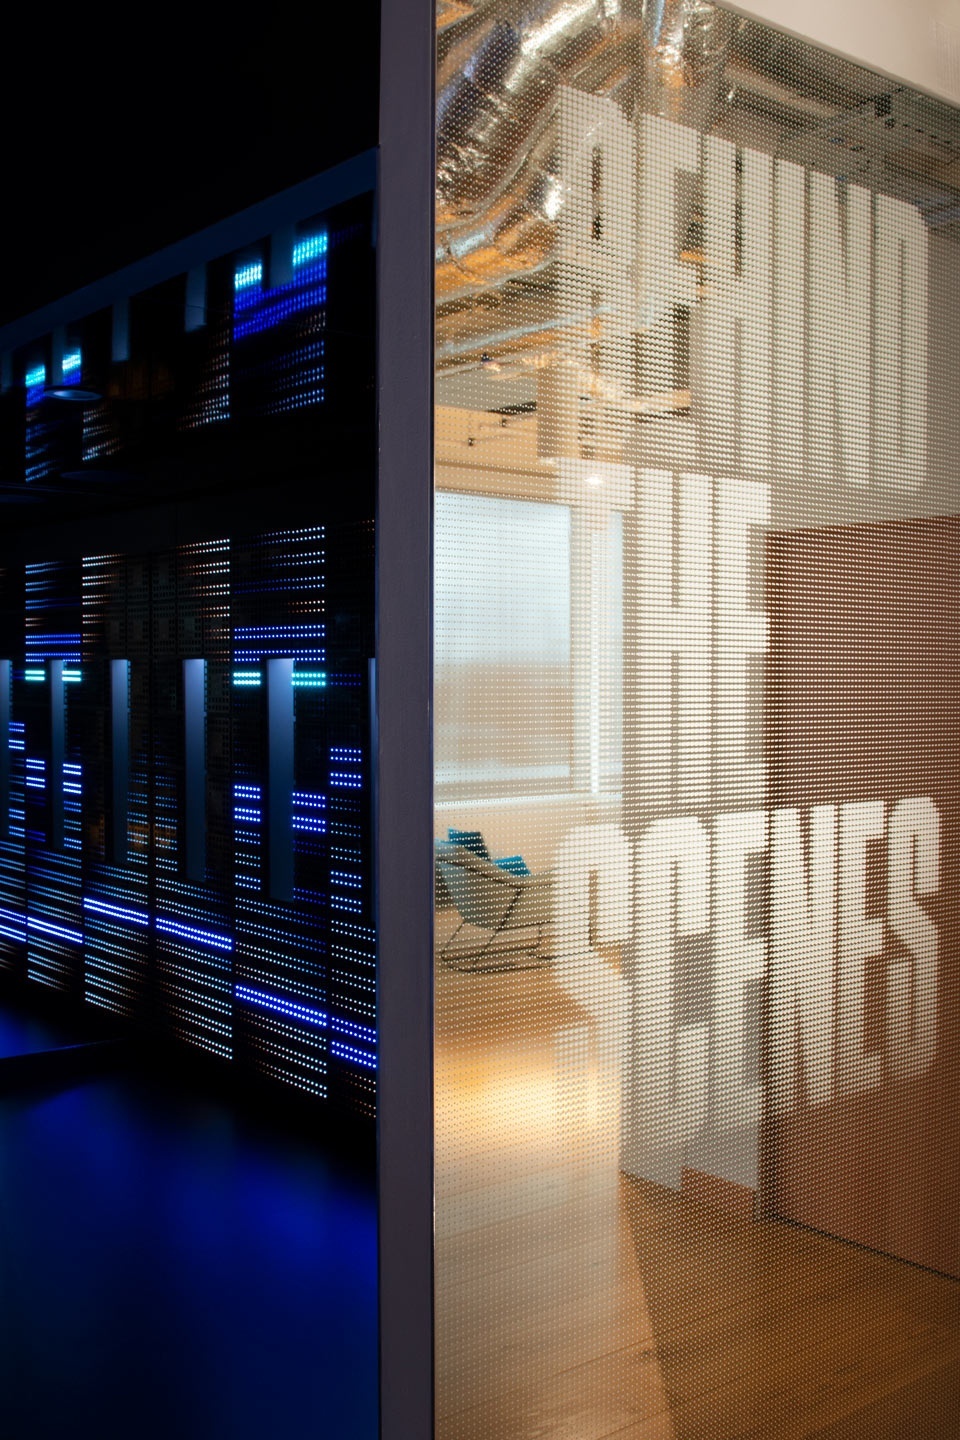 Entrance to an installation, beside a mirror that has the words "Behind the scenes" on it